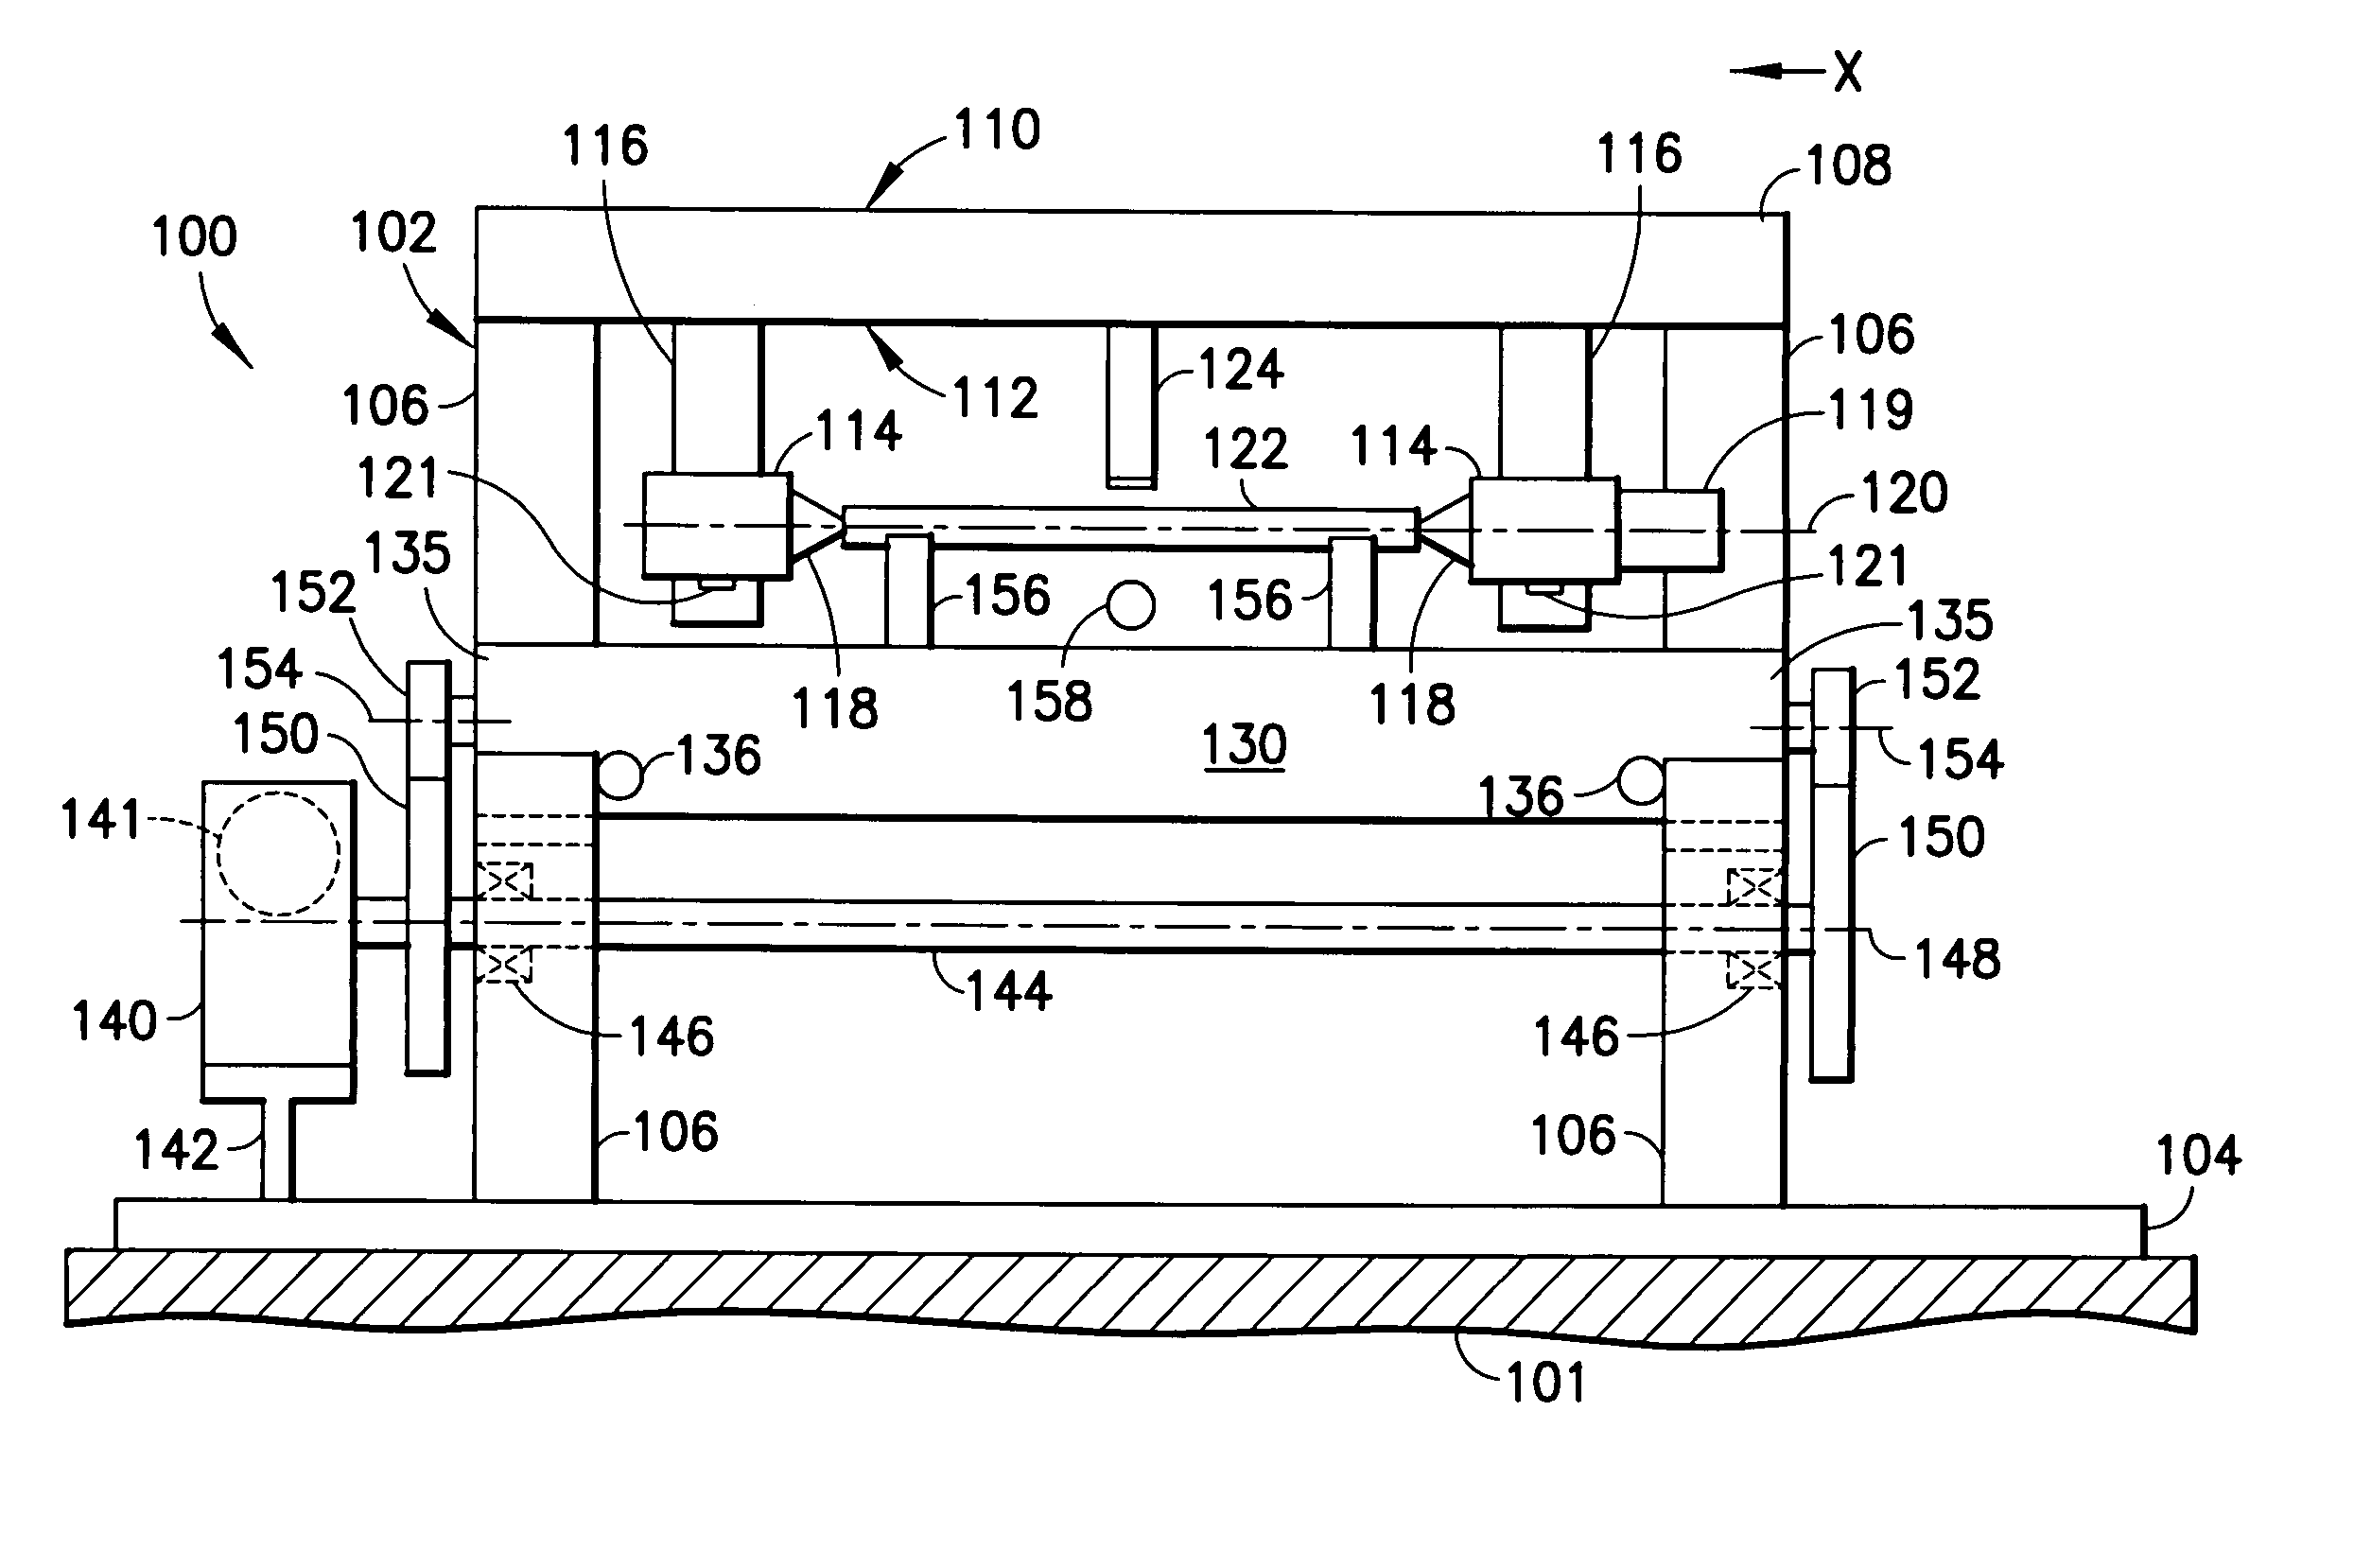 Bend-straightening machine with vertically movable table